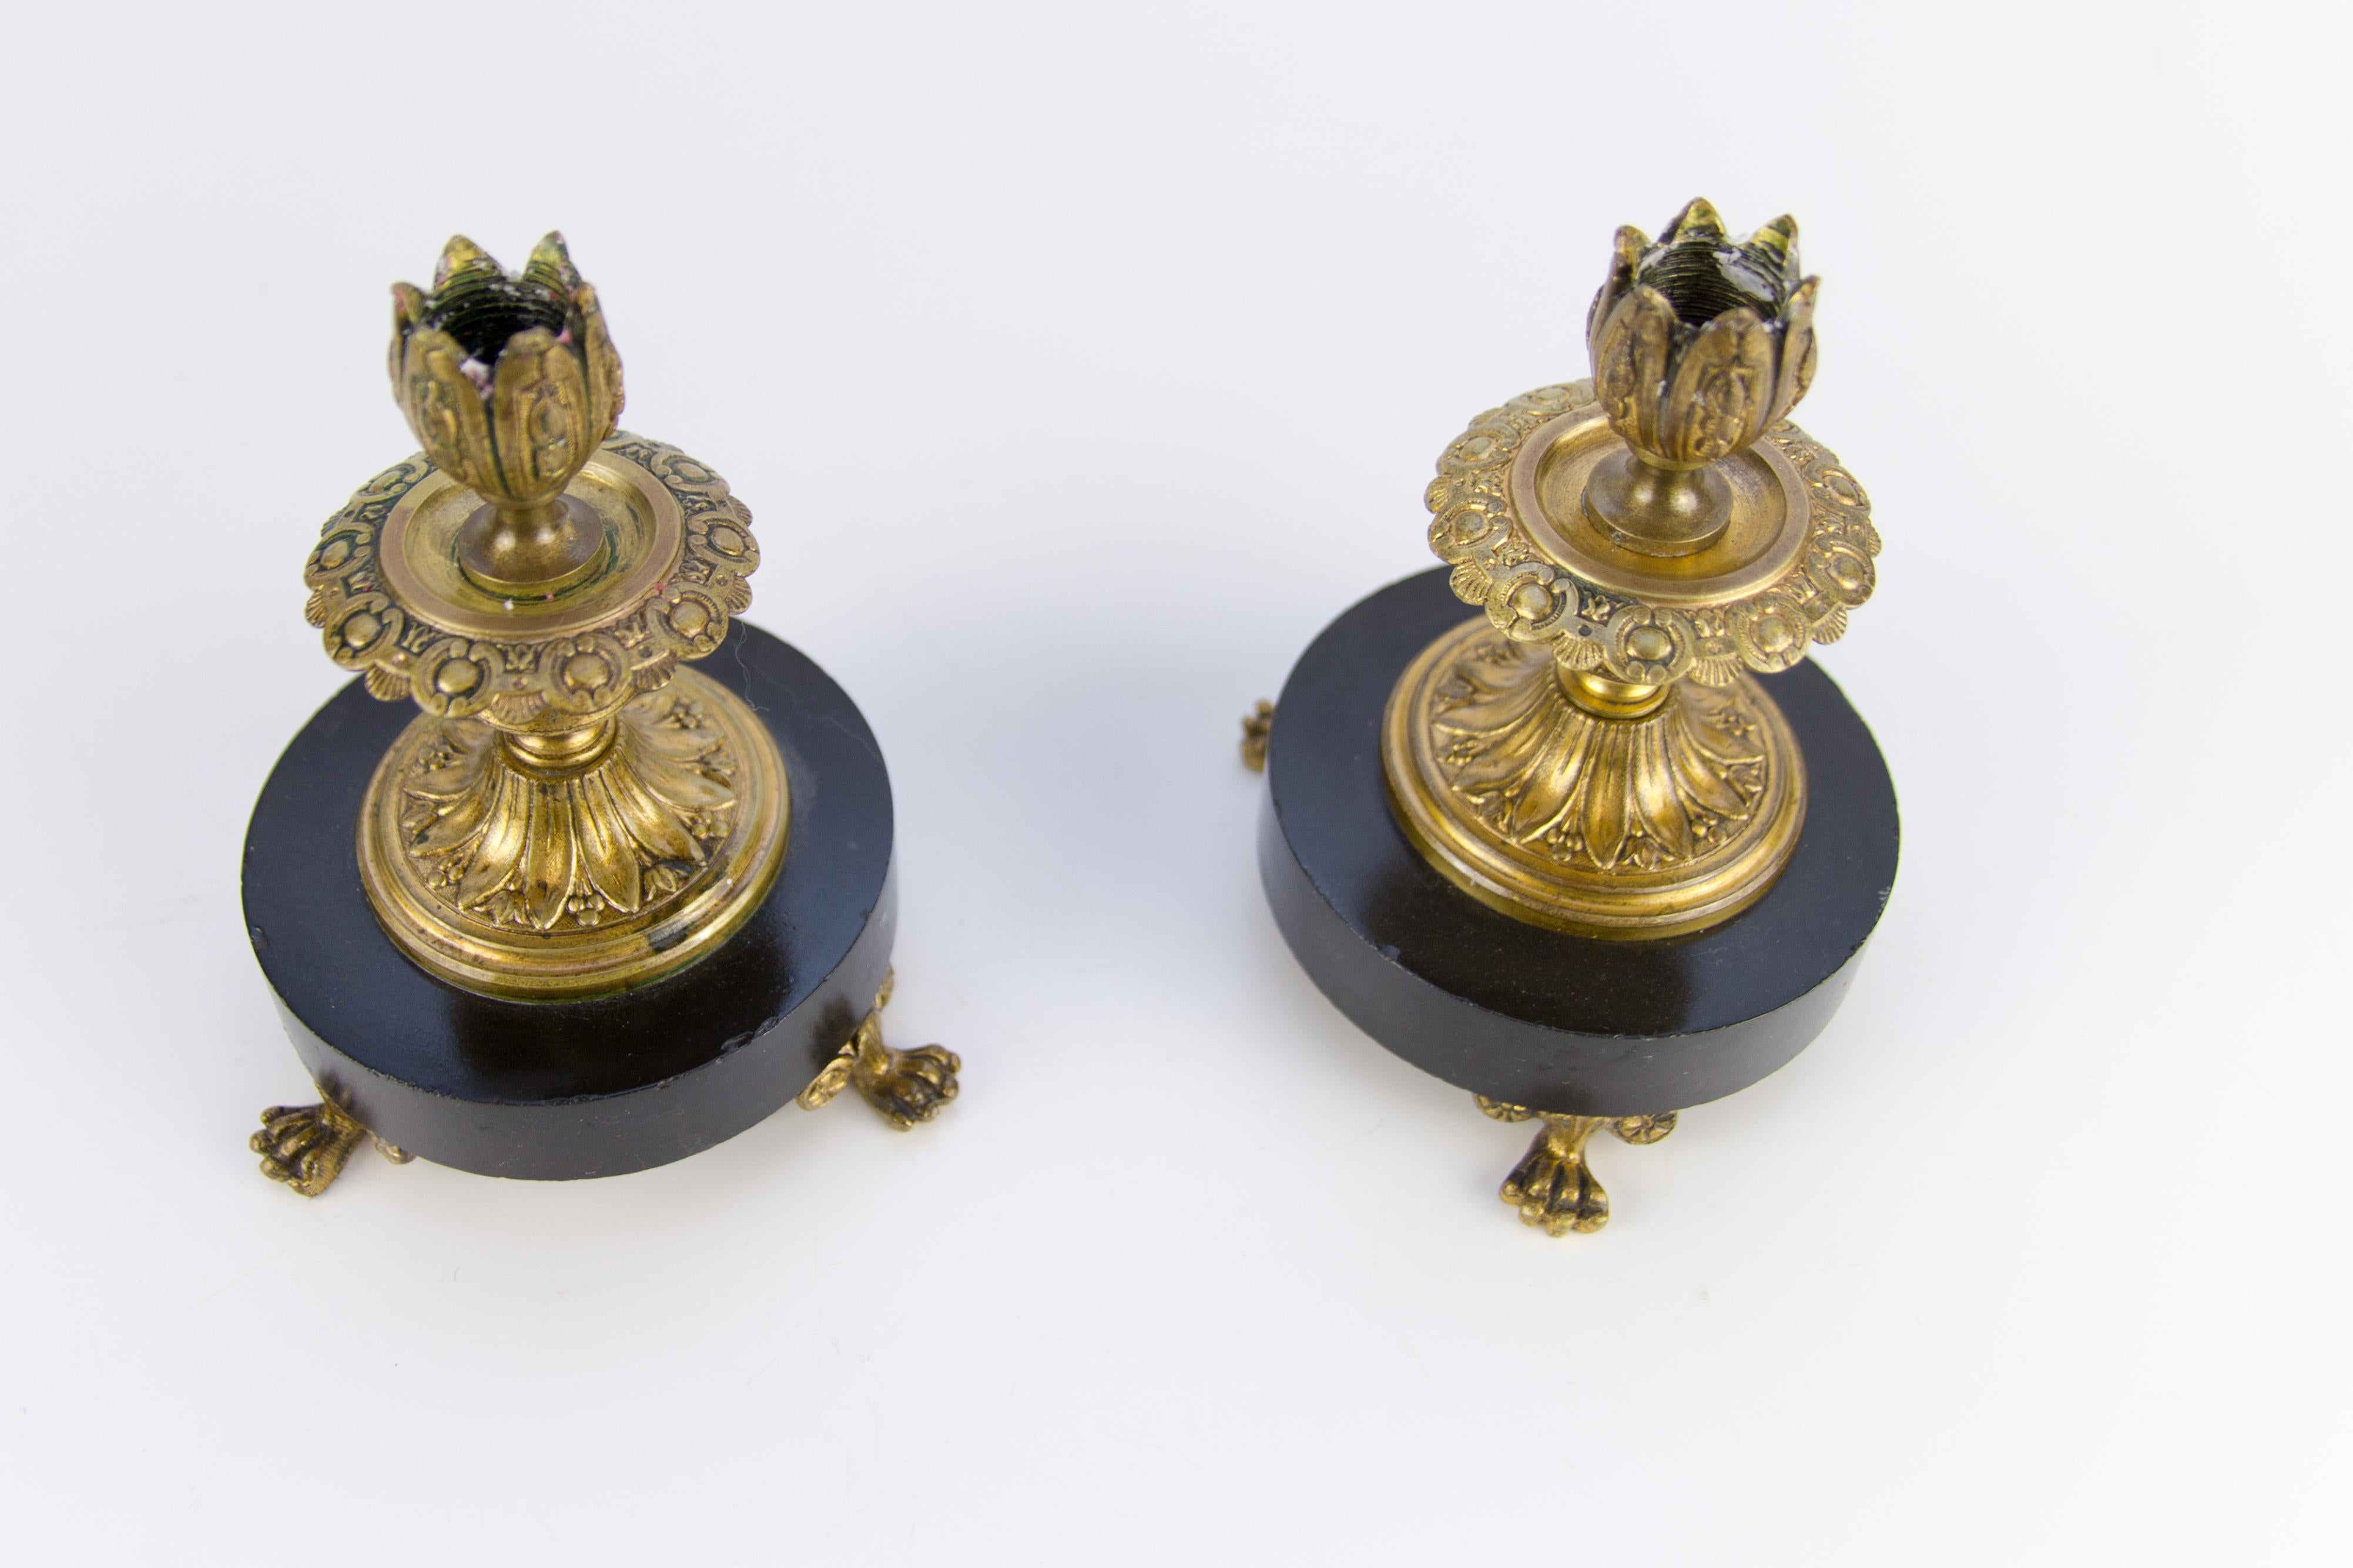 A pair of small but fine French bronze and marble candlesticks from the late 19th century.
In a good antique condition, slight age-related signs of wear – some small chips on marble. Please view the pictures as they form a part of the